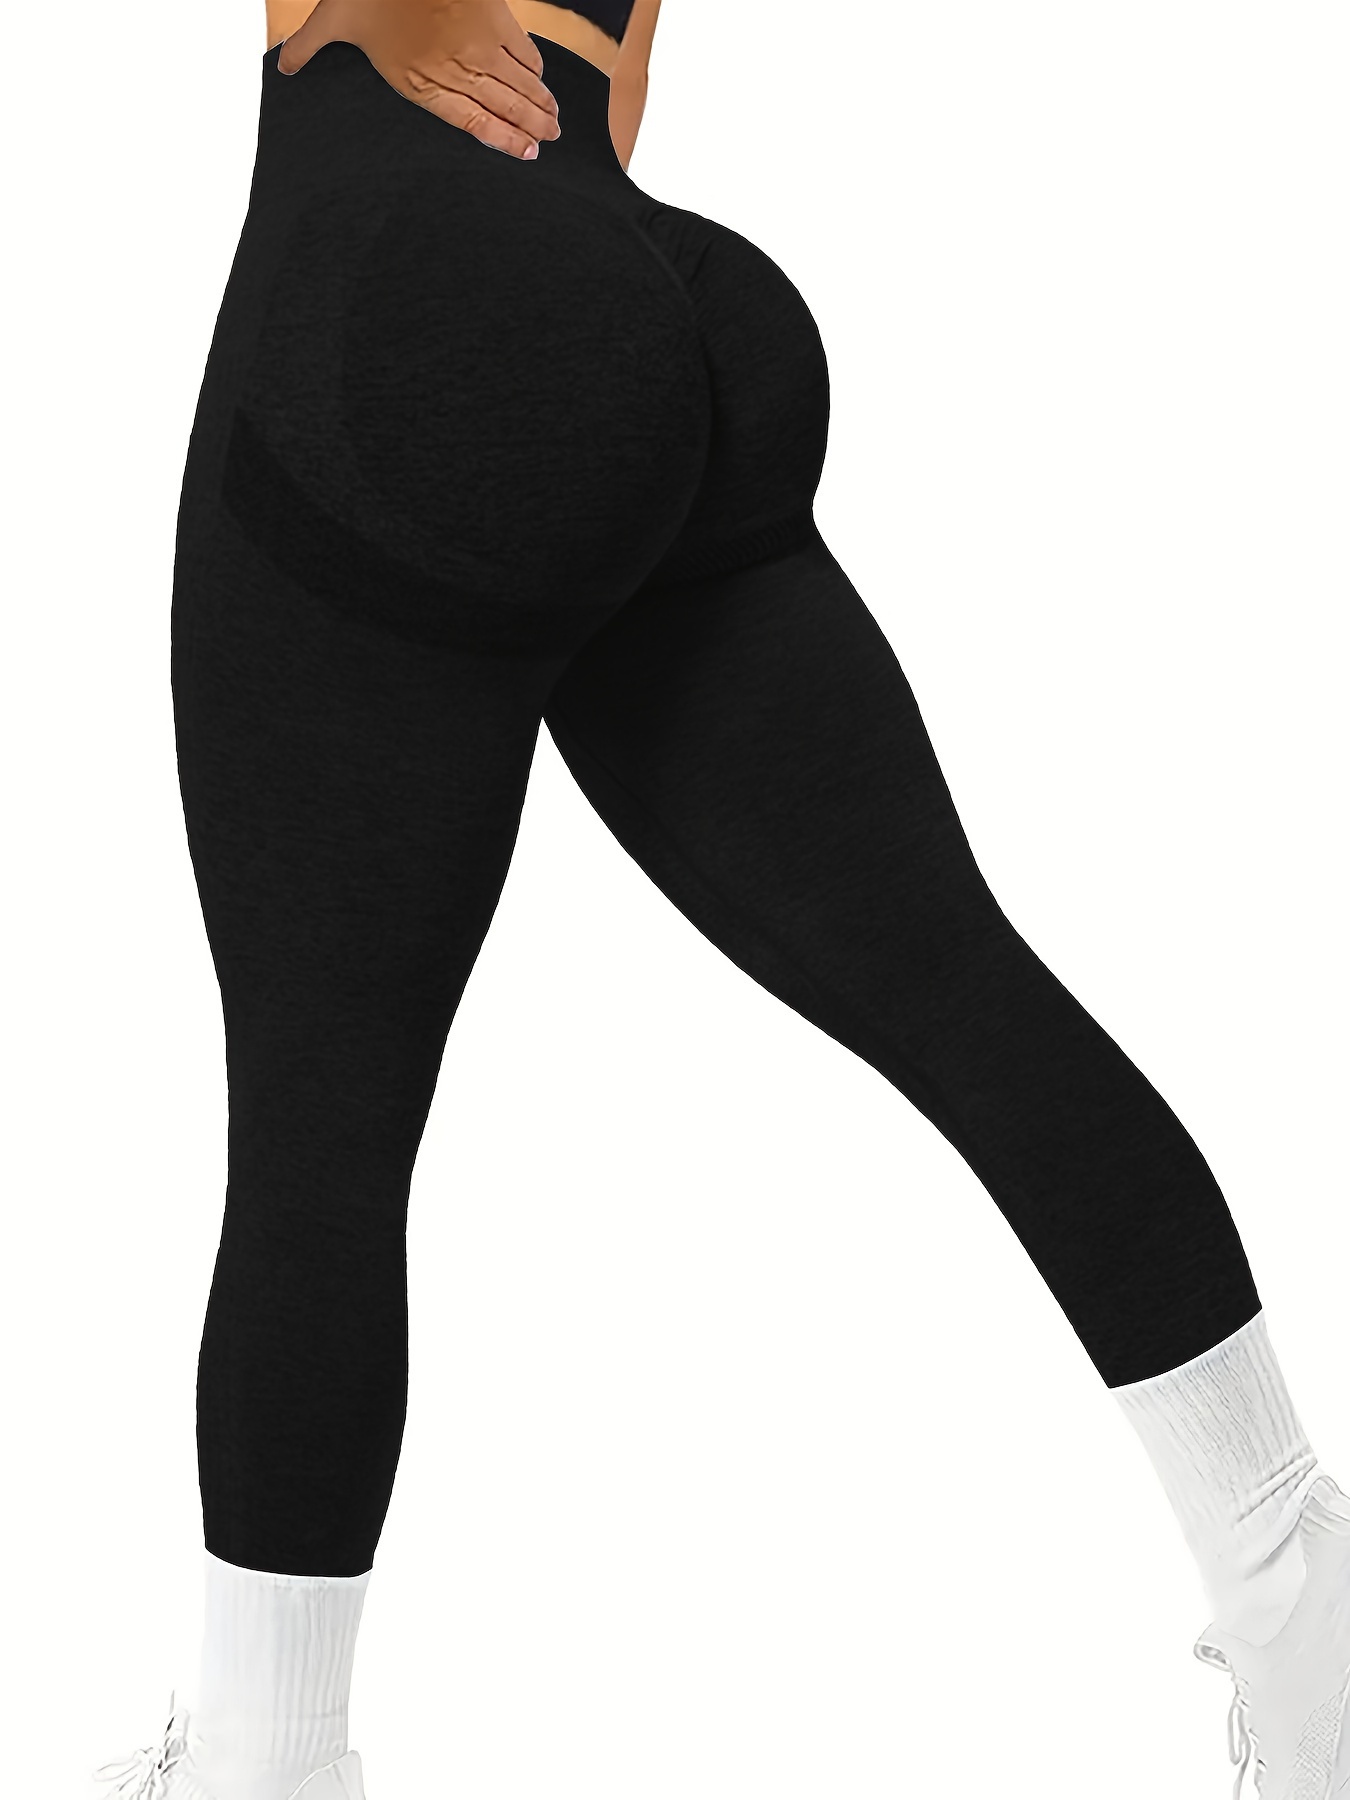 Yoga Basic Running Tights Seamless High Stretch Bubble Butt Push Up Tummy  Control Active Leggings